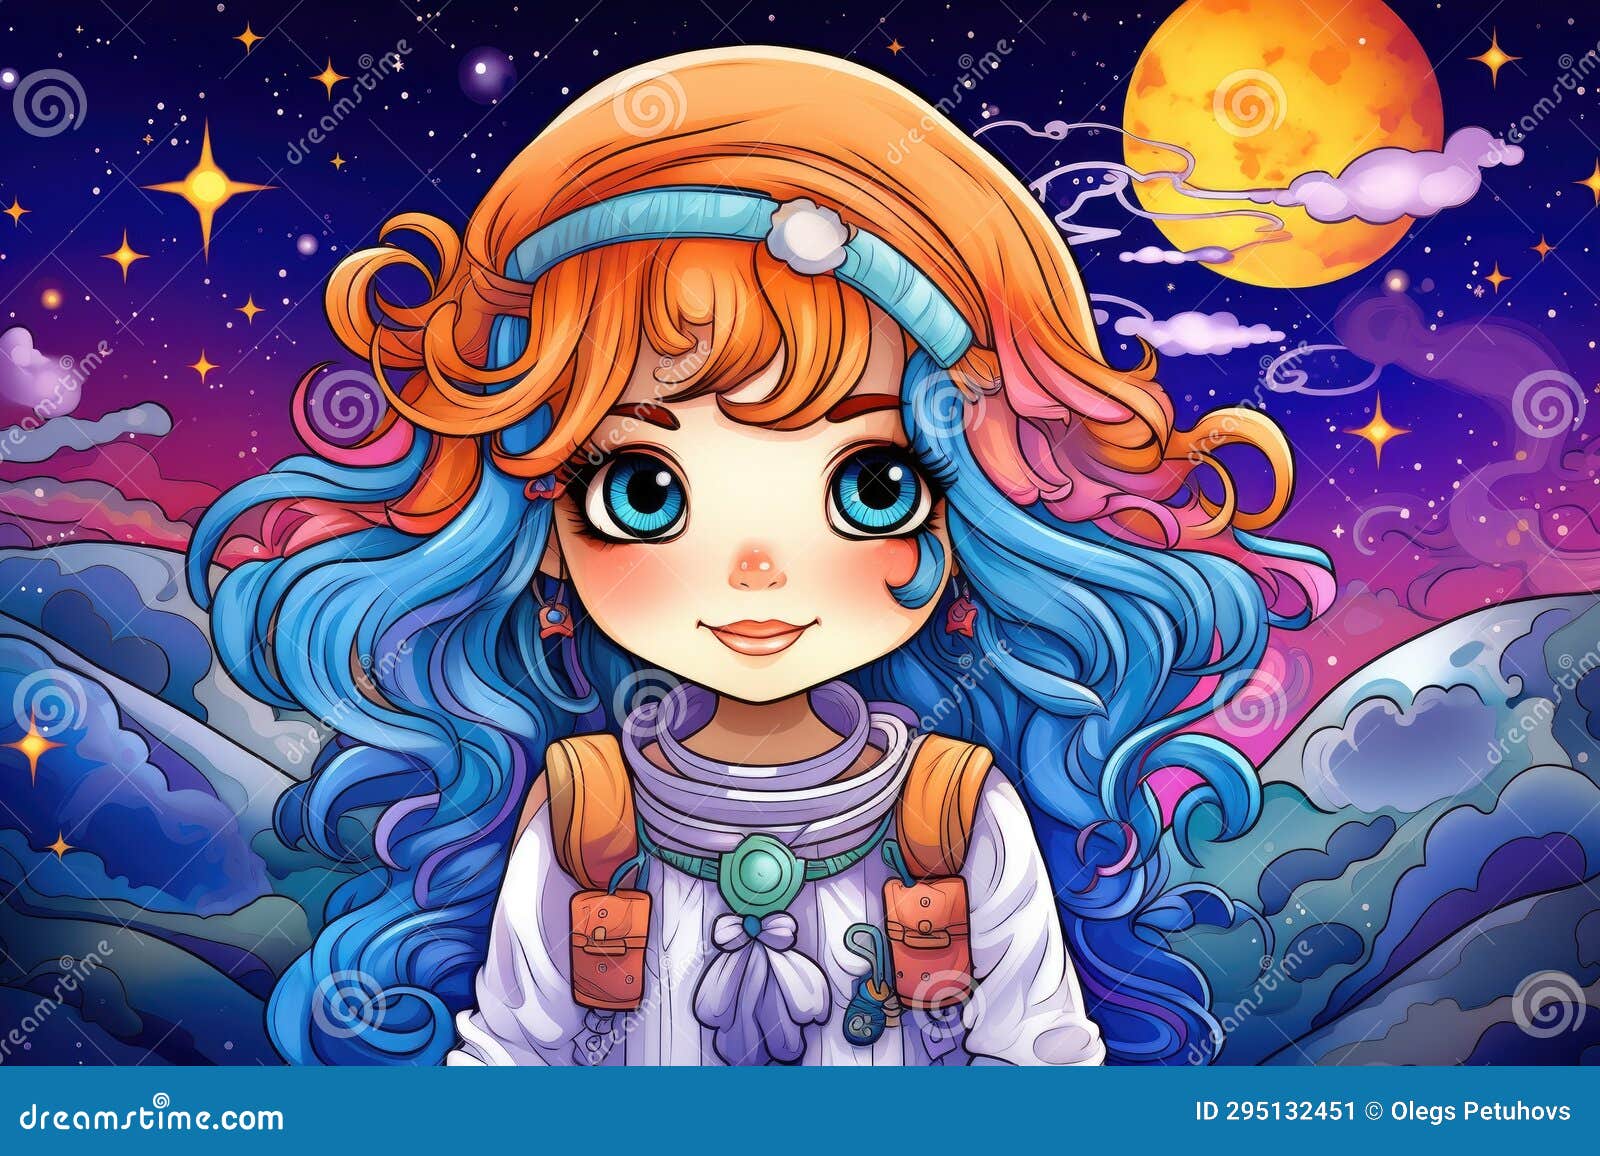 Cartoon girl with blue hair and freckled nose - wide 3